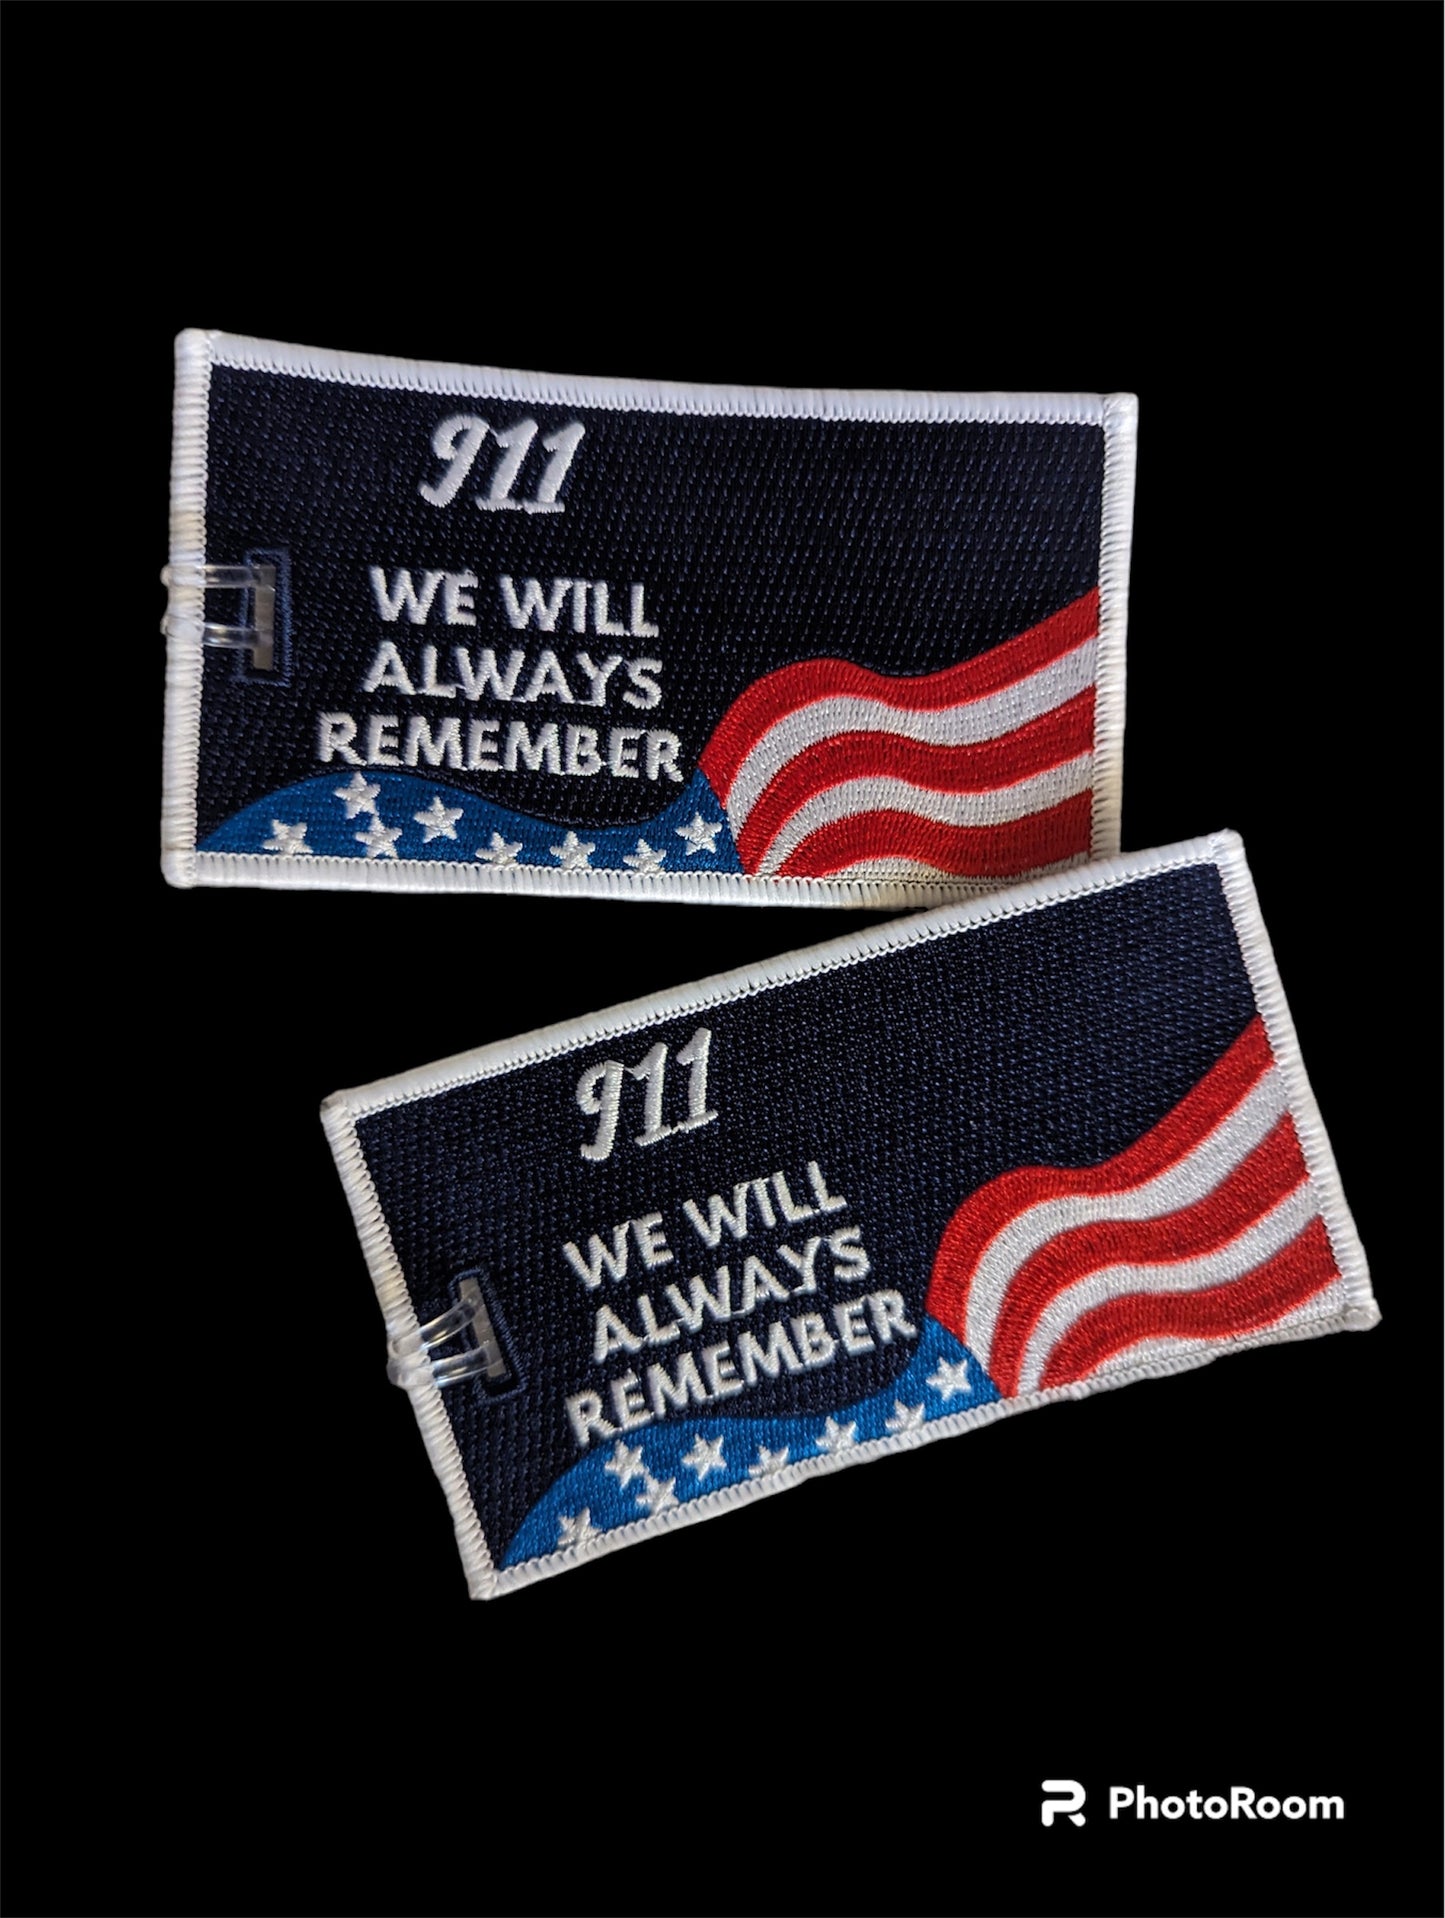 911  WE WILL ALWAYS REMEMBER